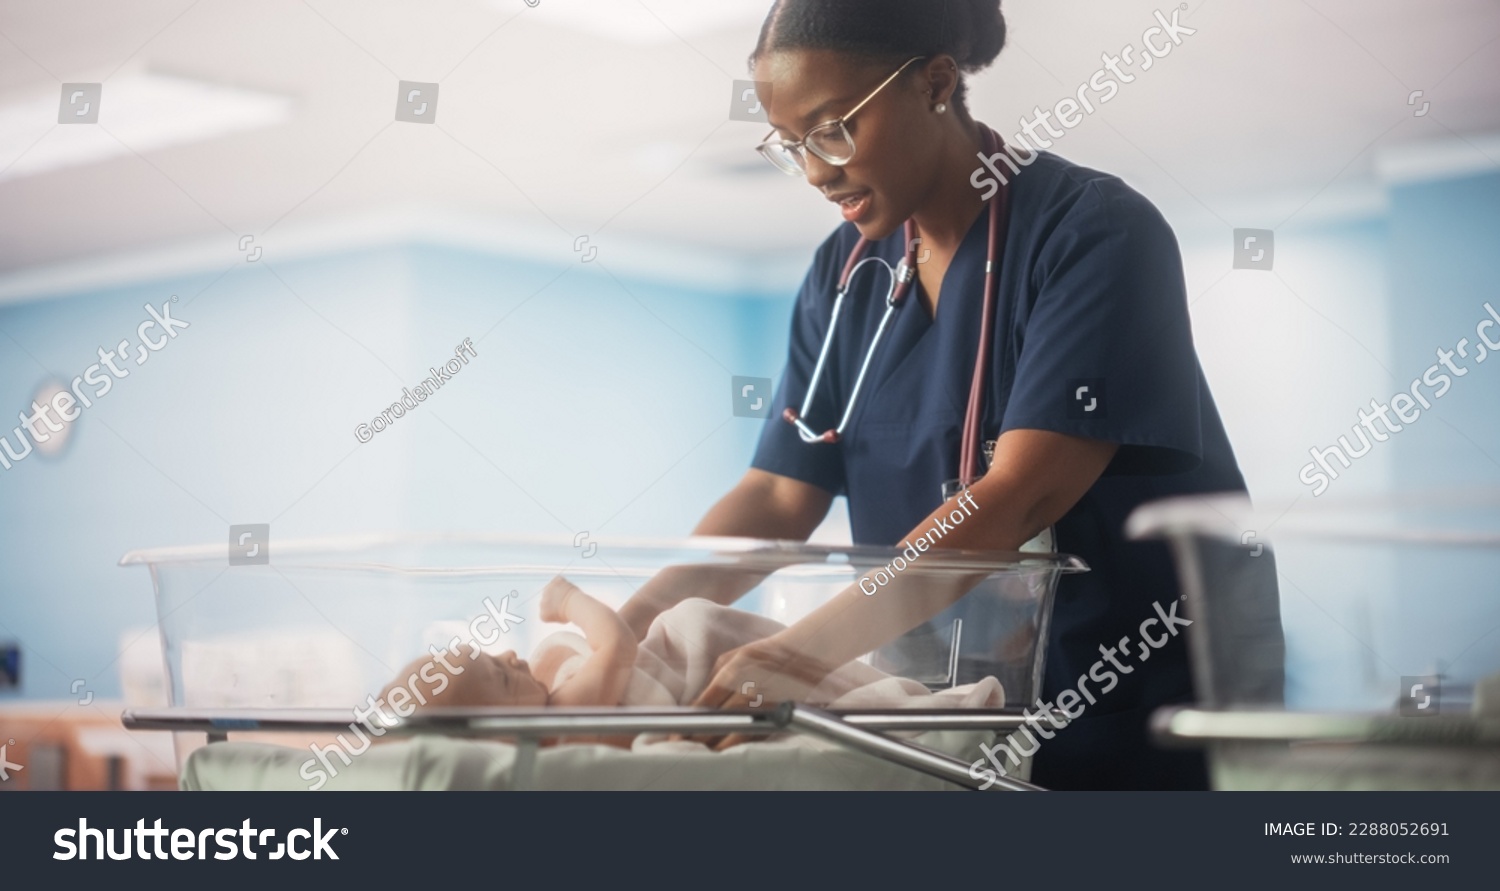 Portrait of a Young Doctor Checking Up and Caring for a Newborn Baby Lying in a Bassinet in a Modern Maternity Ward. Cute Neonate Healthy Child Waiting for Mother to Take the Baby Home #2288052691